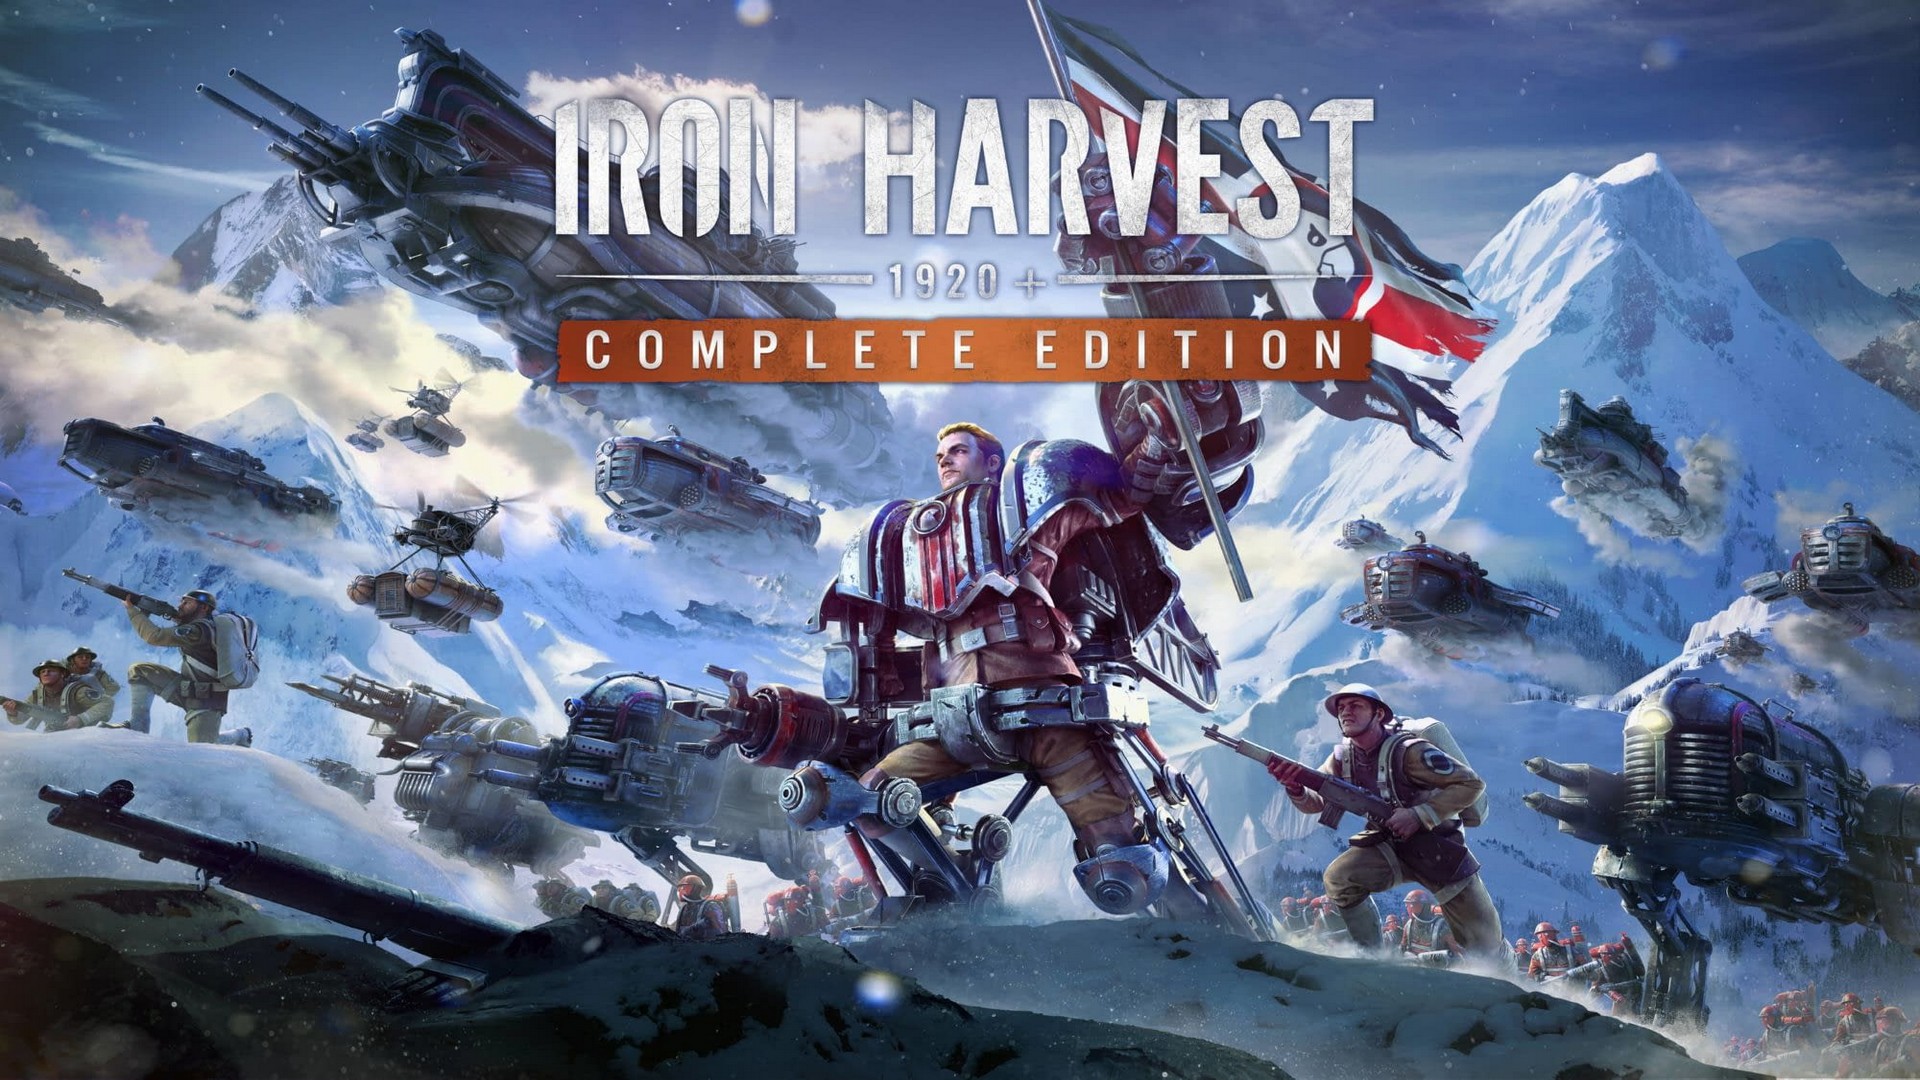 KING Art Games Announce “Iron Harvest Complete Edition” For PlayStation 5 & Xbox Series S|X